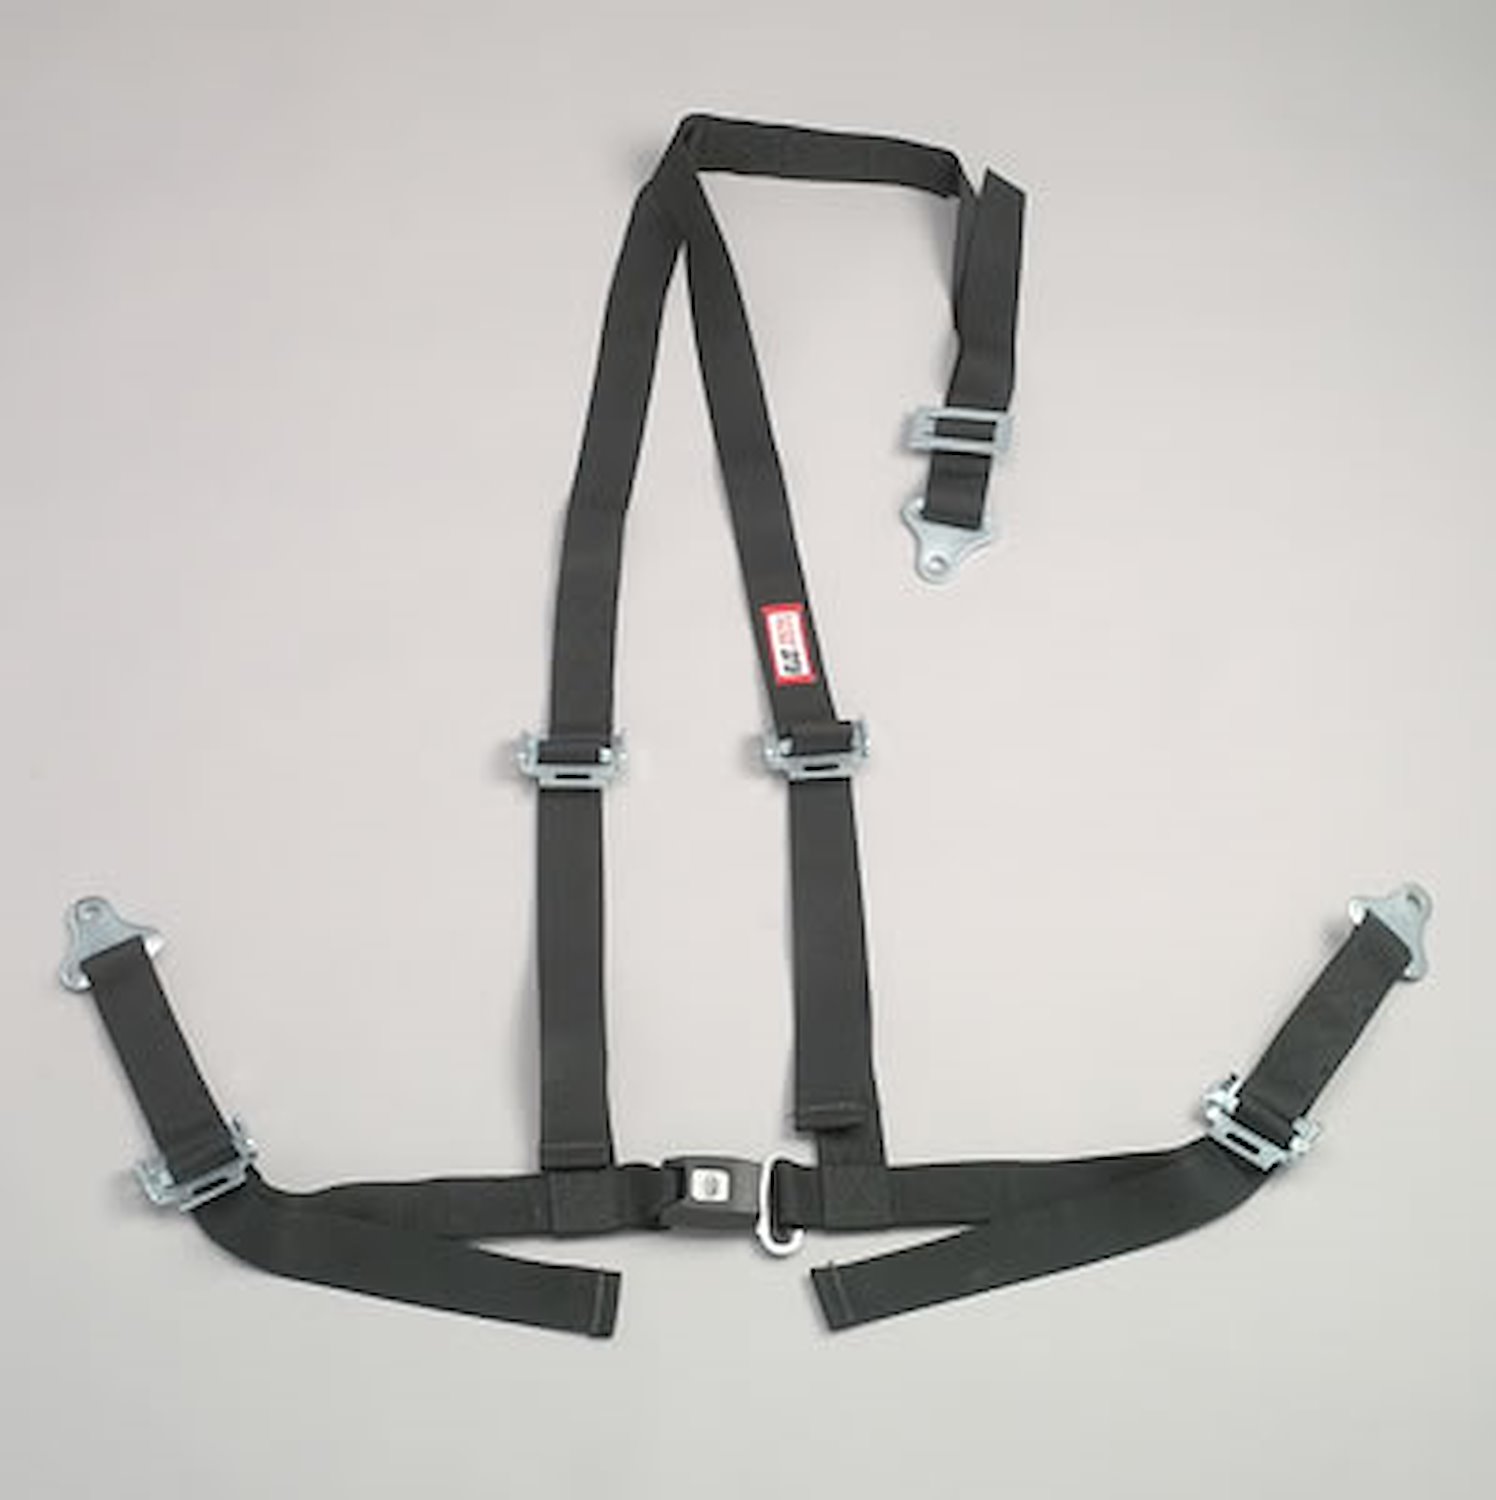 NON-SFI B&T HARNESS 2 PULL UP Lap Belt SNAP 2 S. H. V ROLL BAR Mount BOLT RED